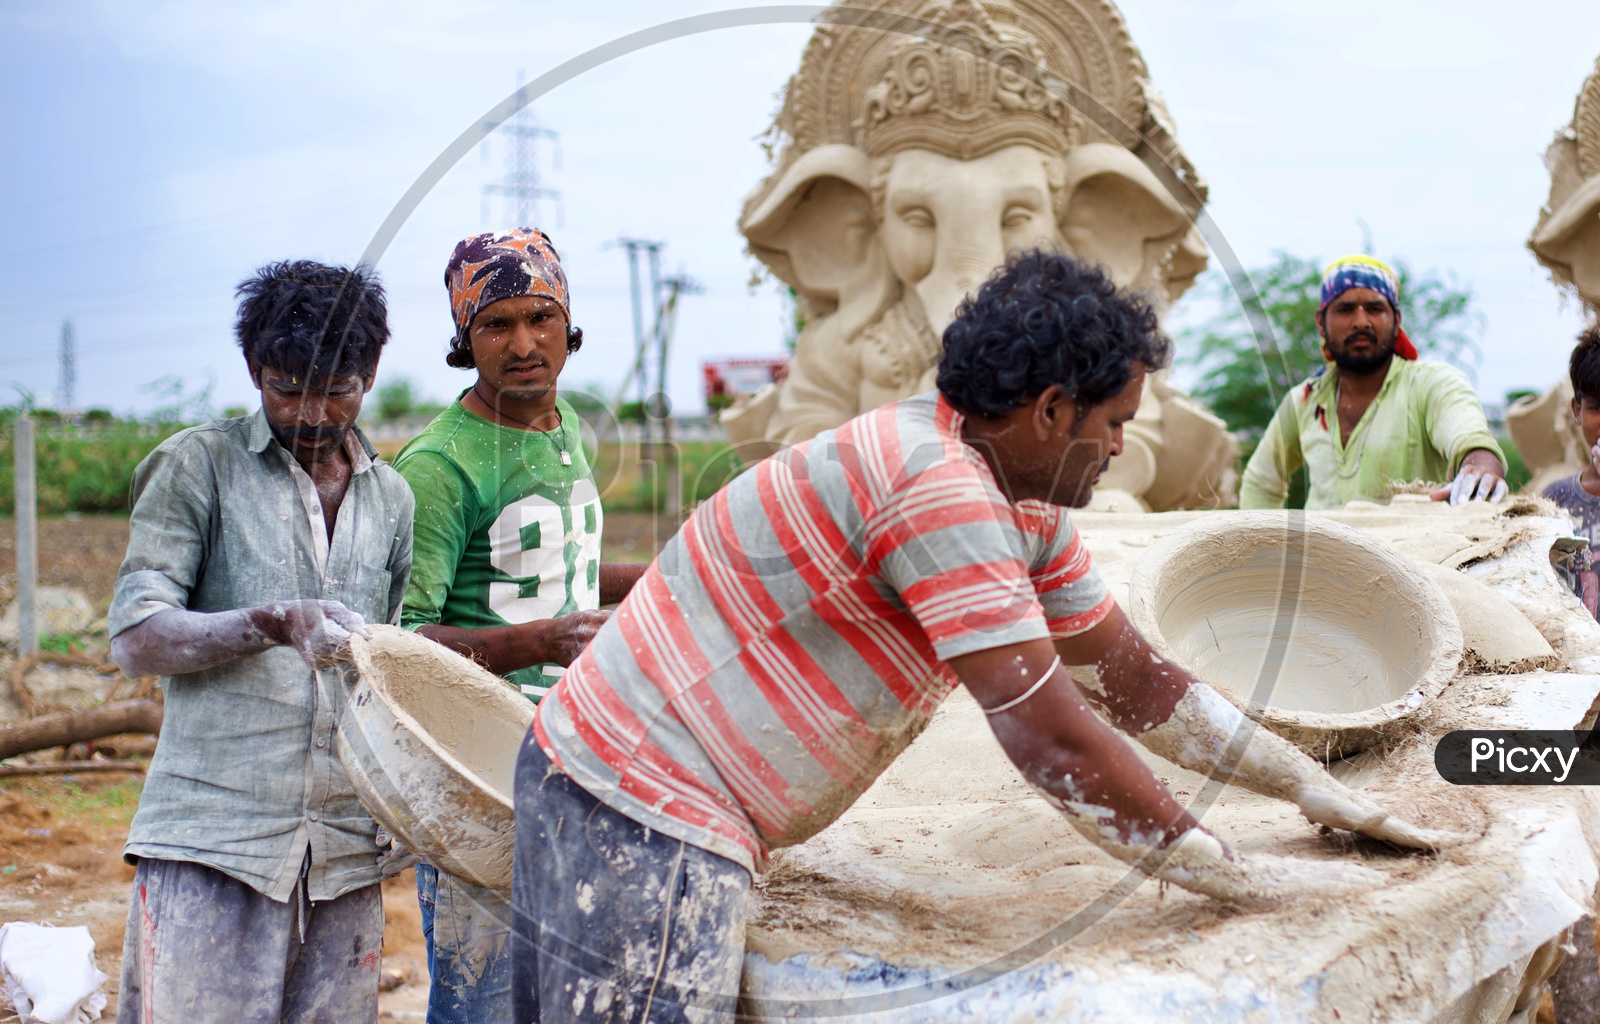 Workers making Ganesh statues with plaster of paris.